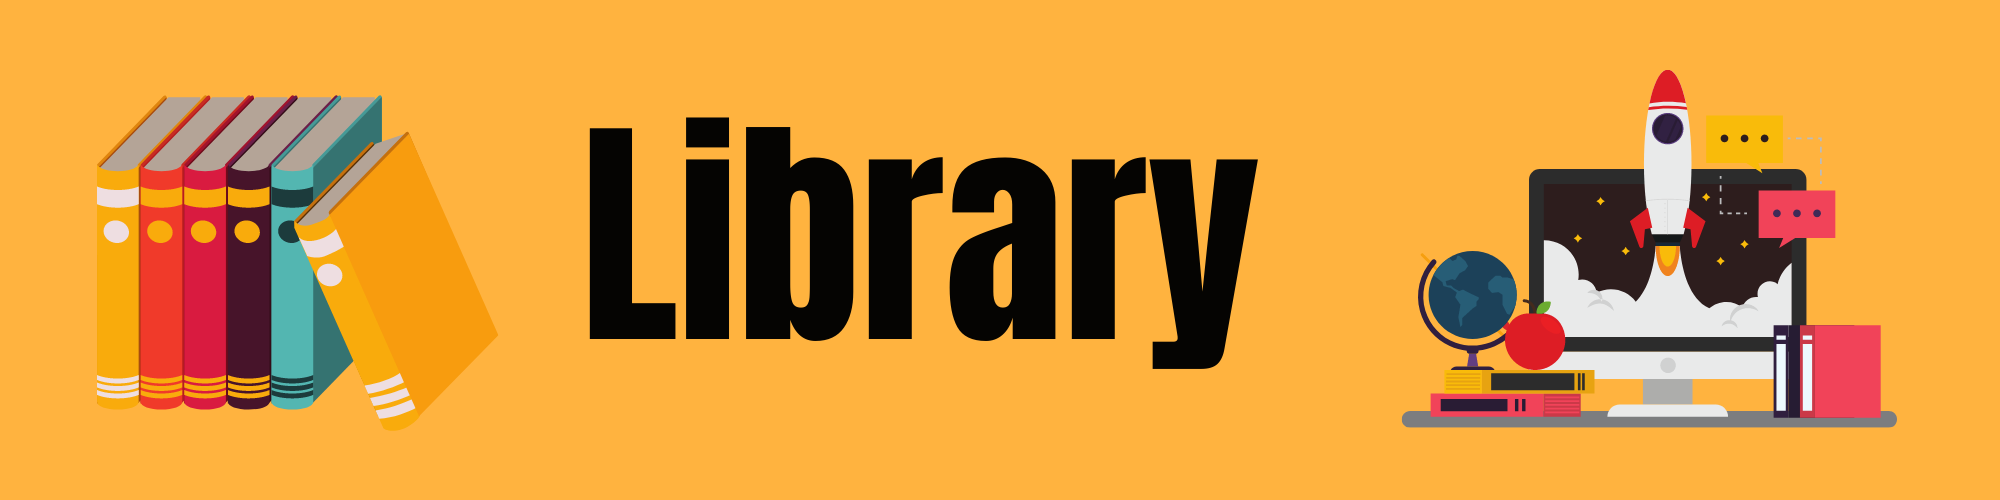 Banner that says Library